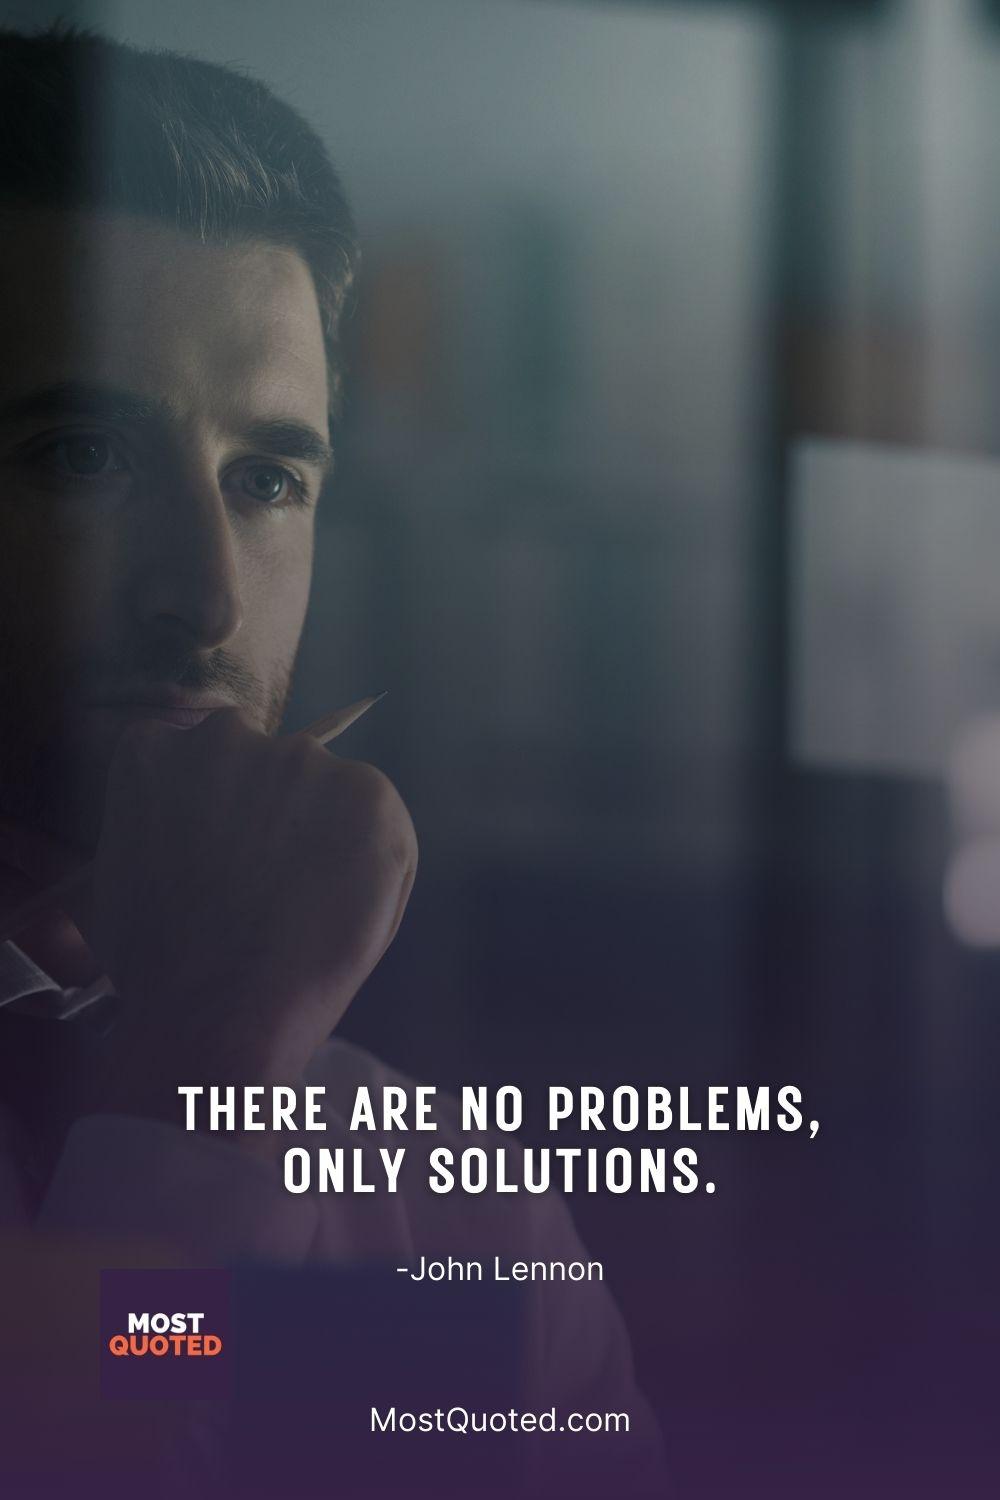 There are no problems, only solutions. - John Lennon